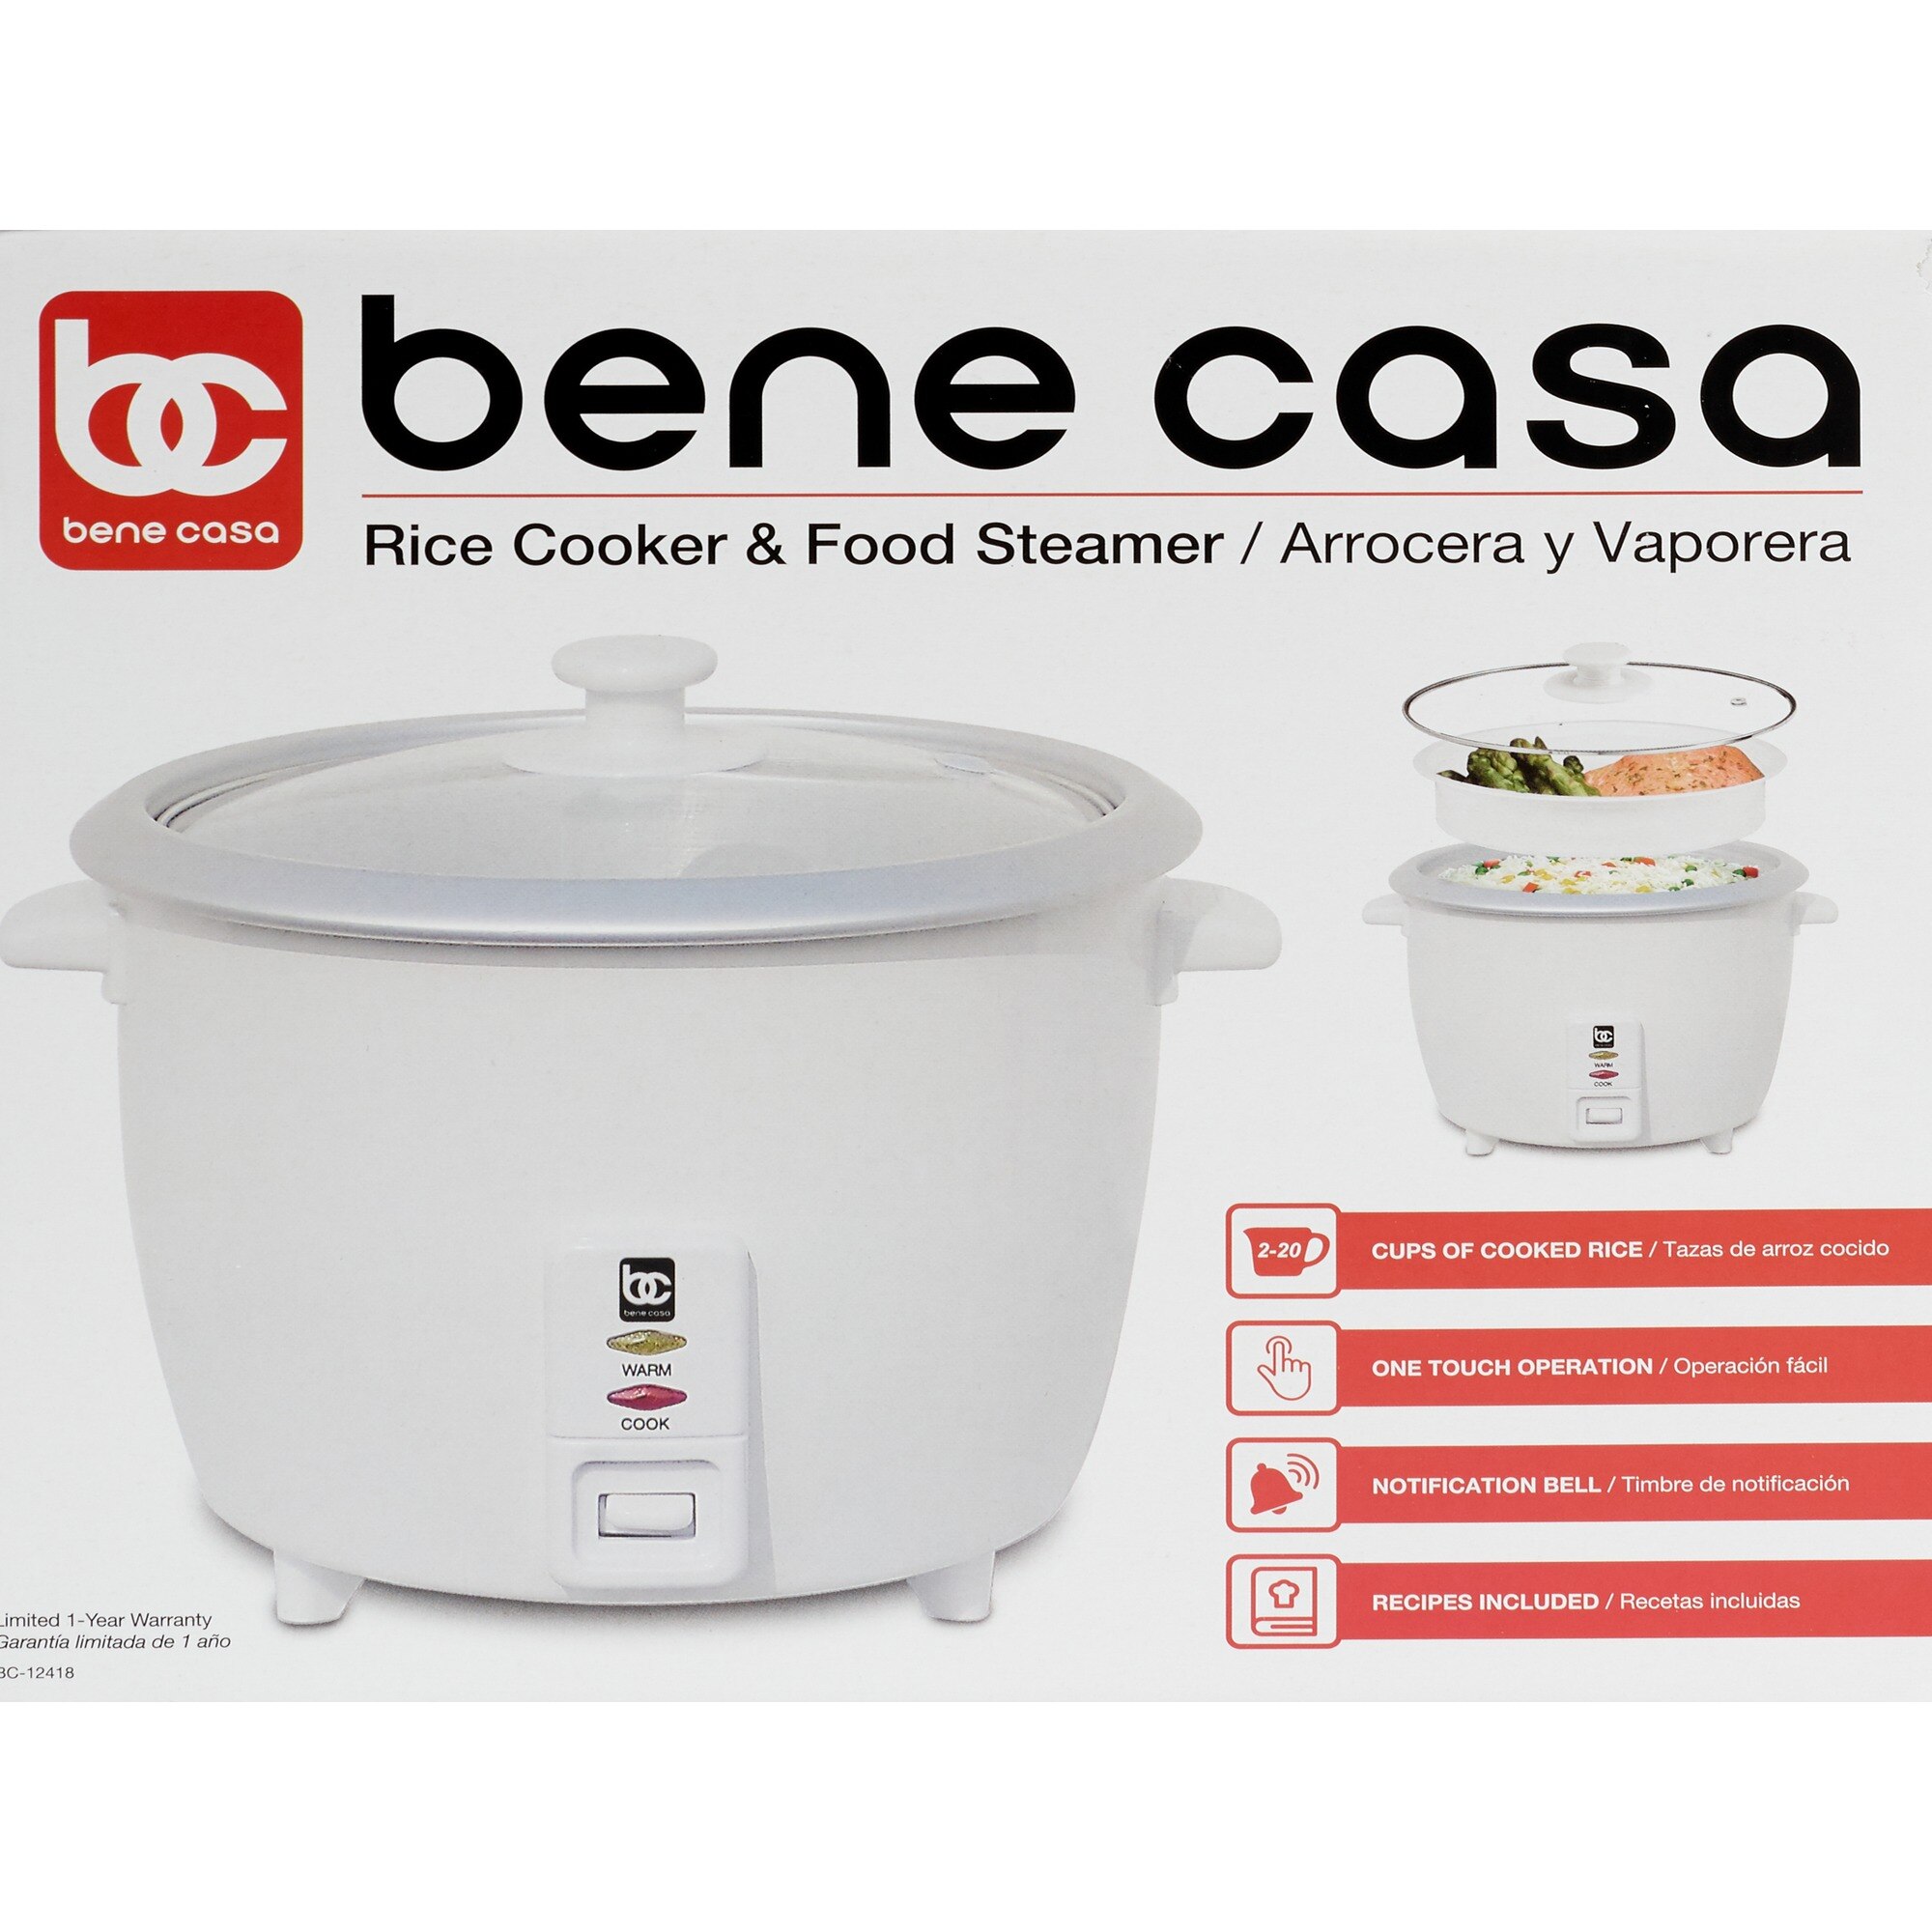 Customer Reviews: Bene Casa Rice Cooker, White, 10 CUP (uncooked